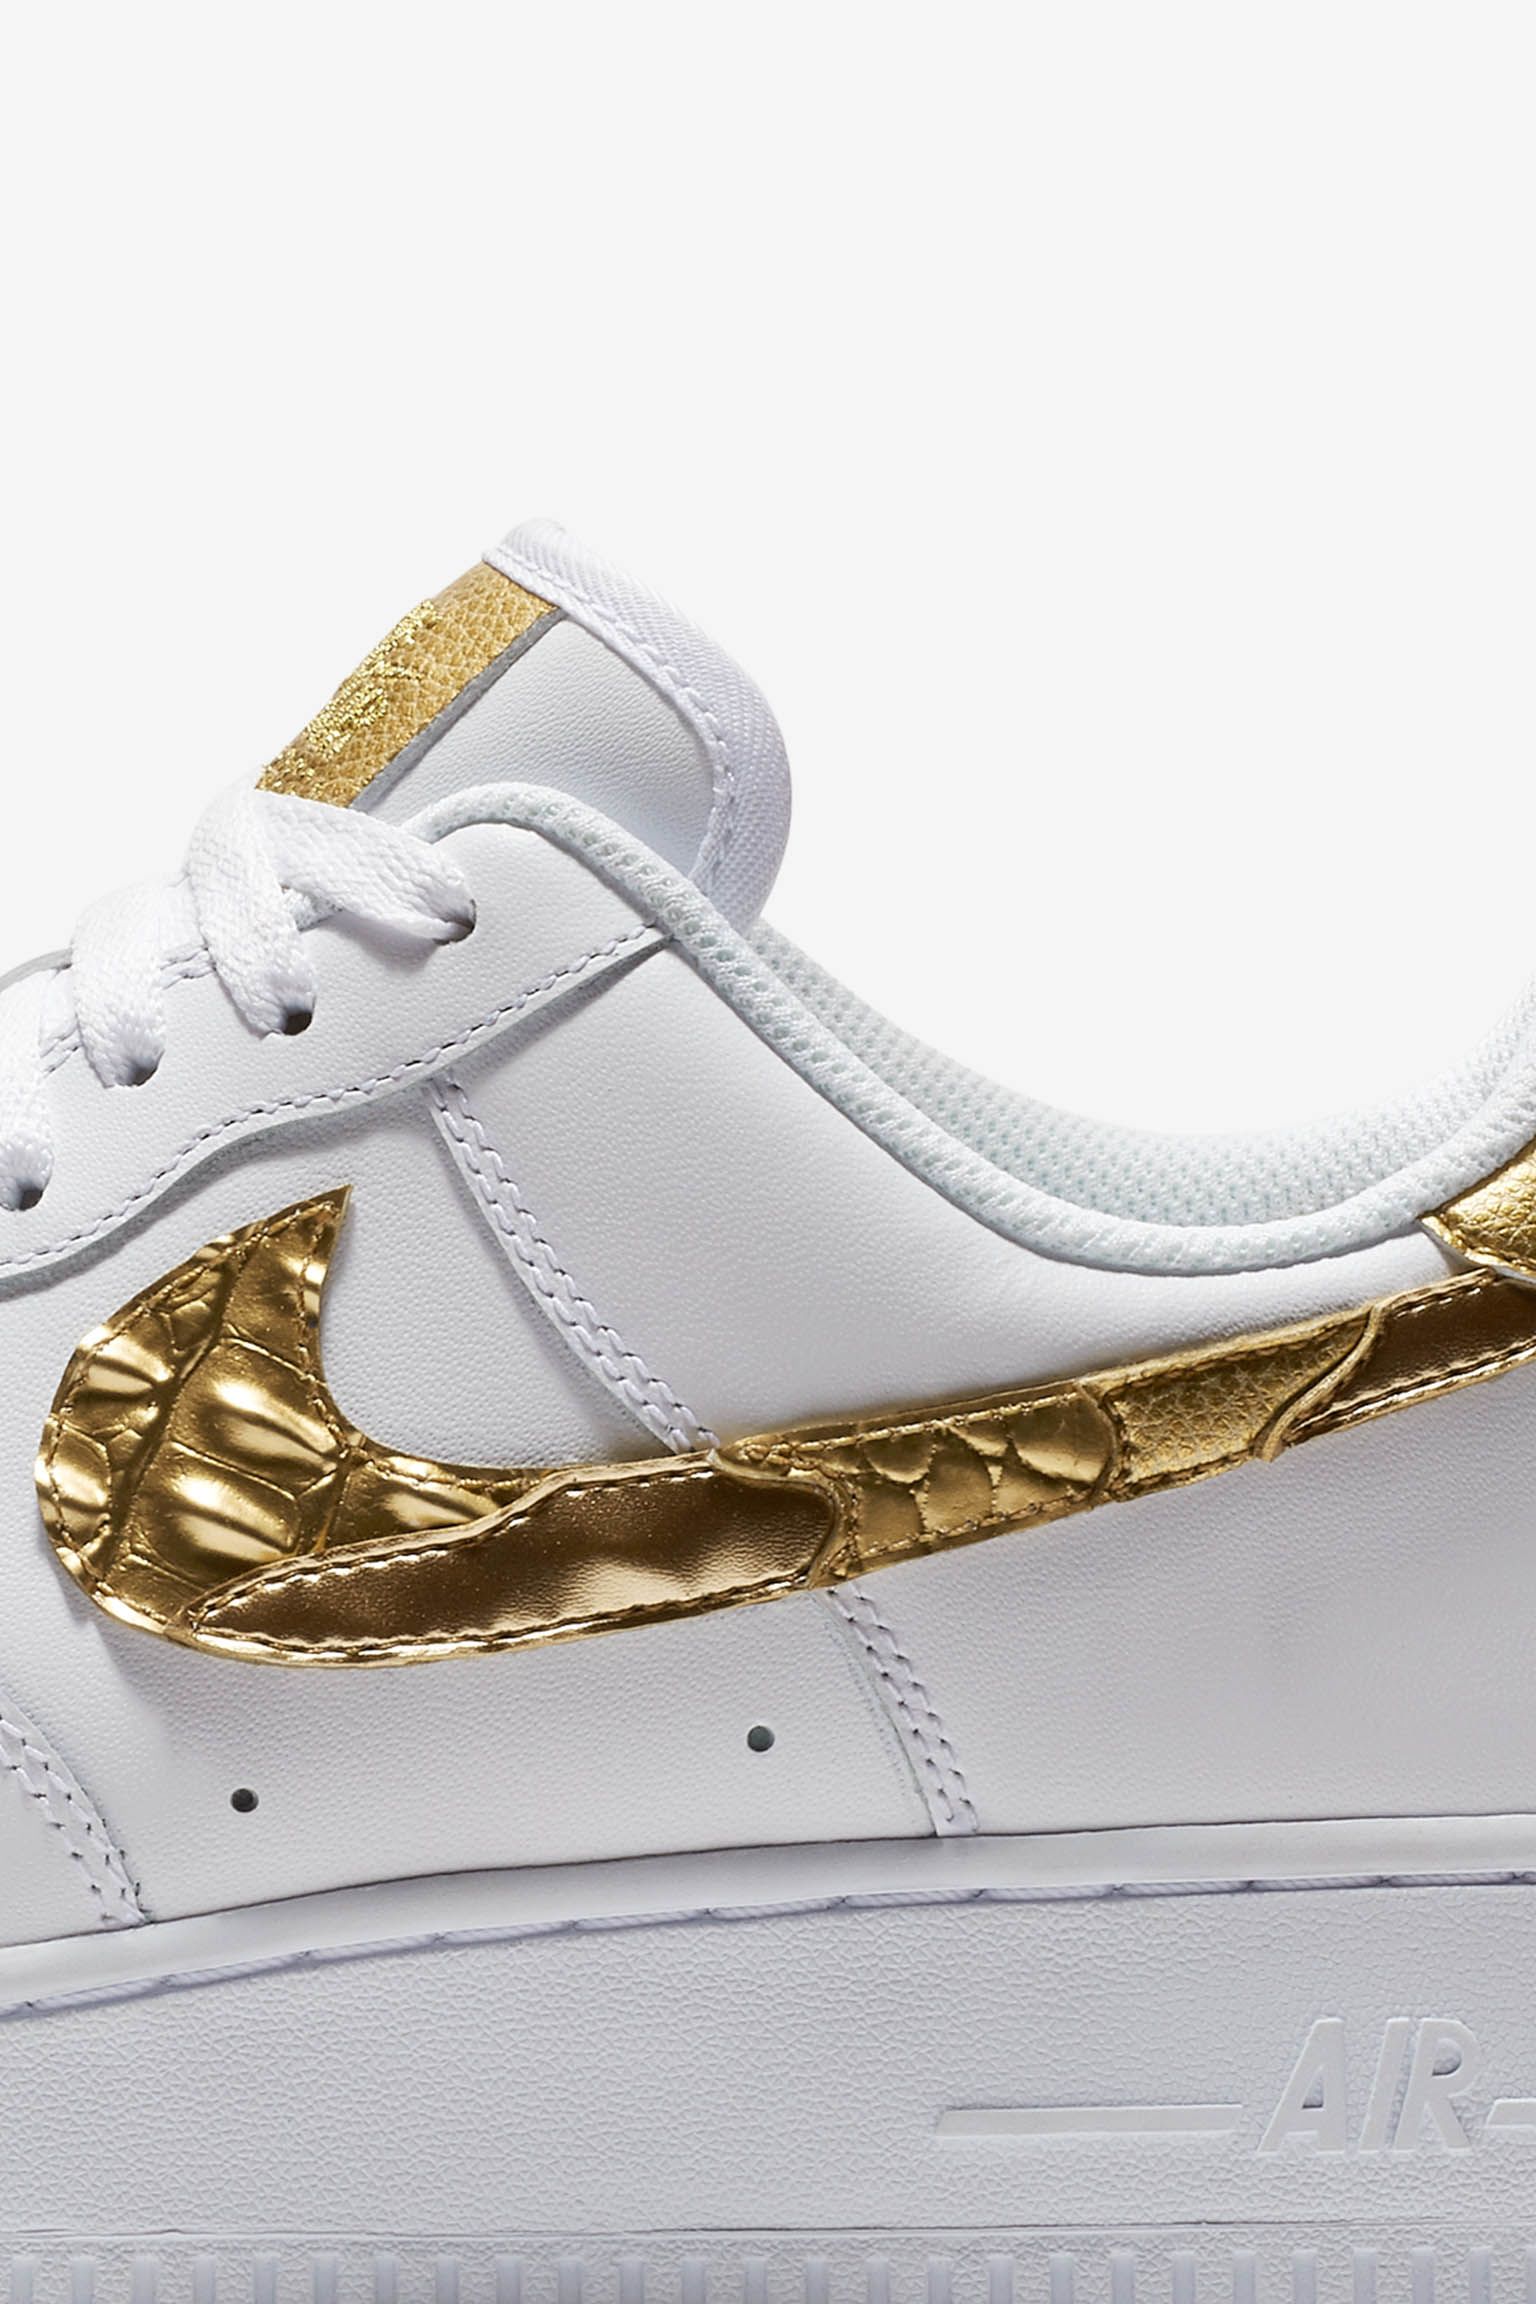 Imperio Inca desconocido Respetuoso Nike Air Force 1 CR7 'Golden Patchwork' Release Date. Nike SNKRS GB